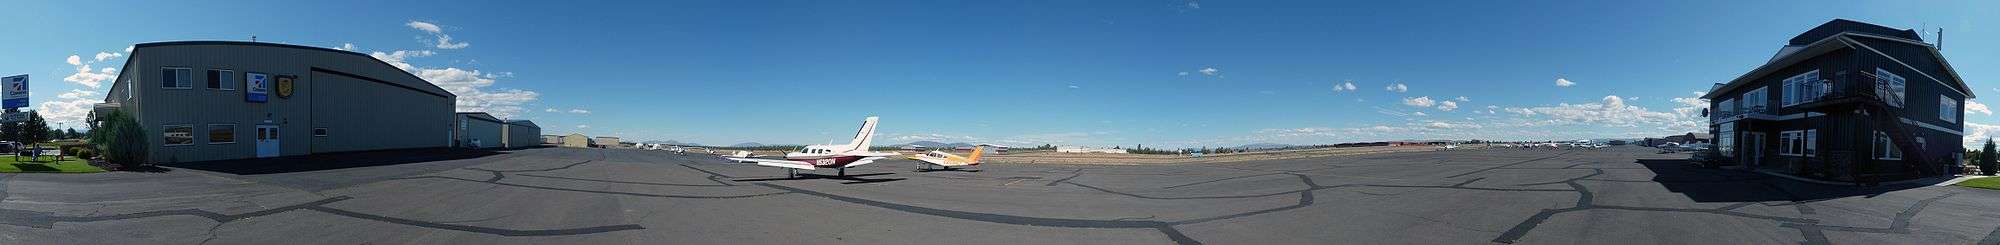 Picture of Bend, Oregon airport